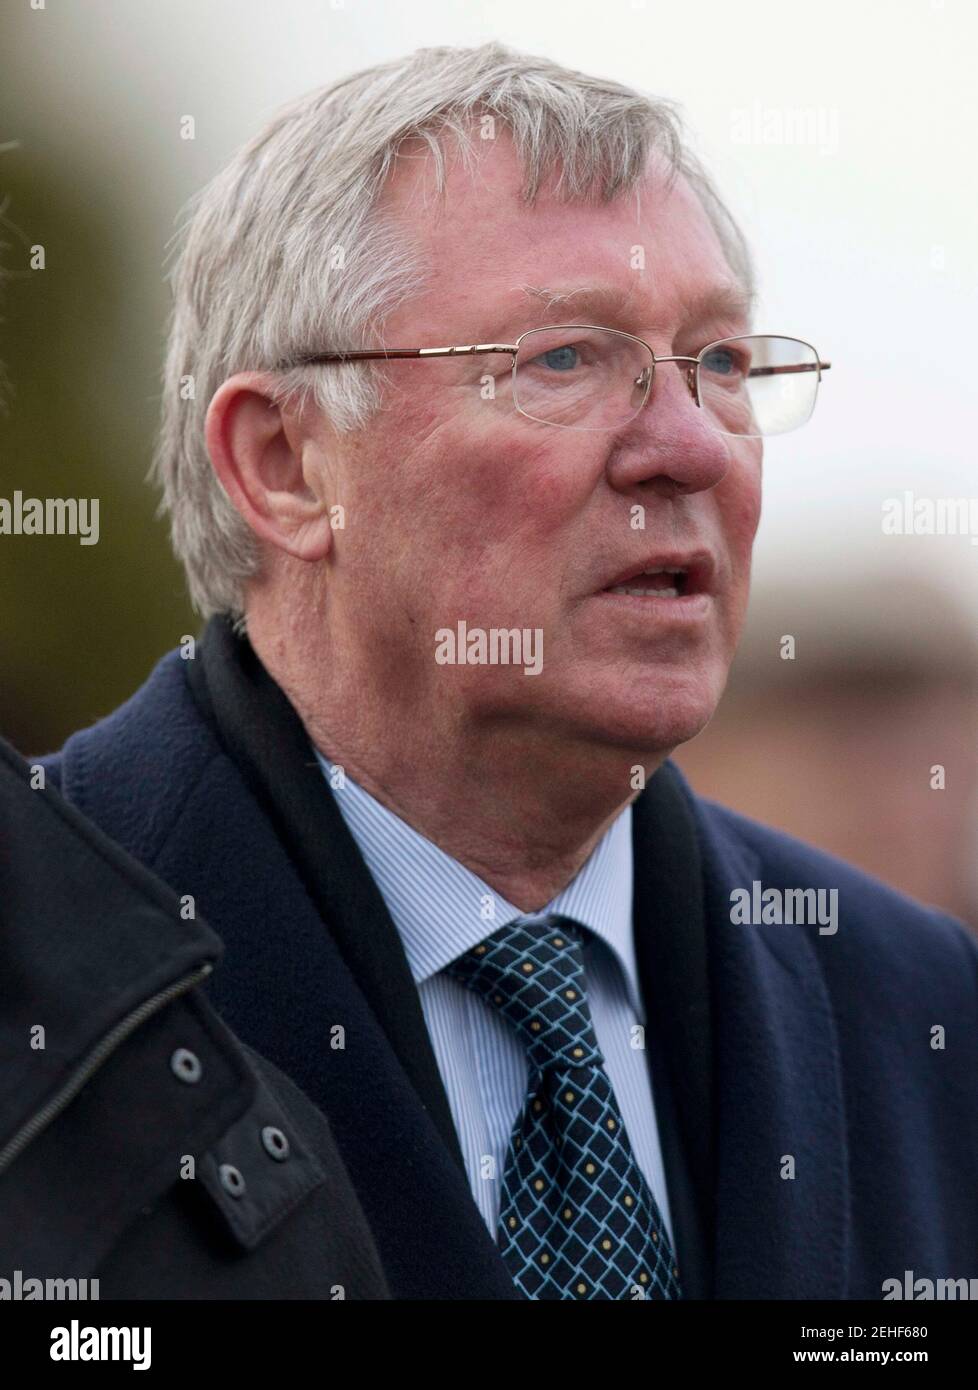 Horse Racing - Cheltenham Festival  - Cheltenham Racecourse - 14/3/13  Manchester United manager Sir Alex Ferguson watches his horse Harry The Viking run in the 16.40 Fulke Walwyn Kim Muir Challenge Cup Handicap Steeple Chase  Mandatory Credit: Action Images / Julian Herbert  Livepic *** Local Caption *** - Stock Photo